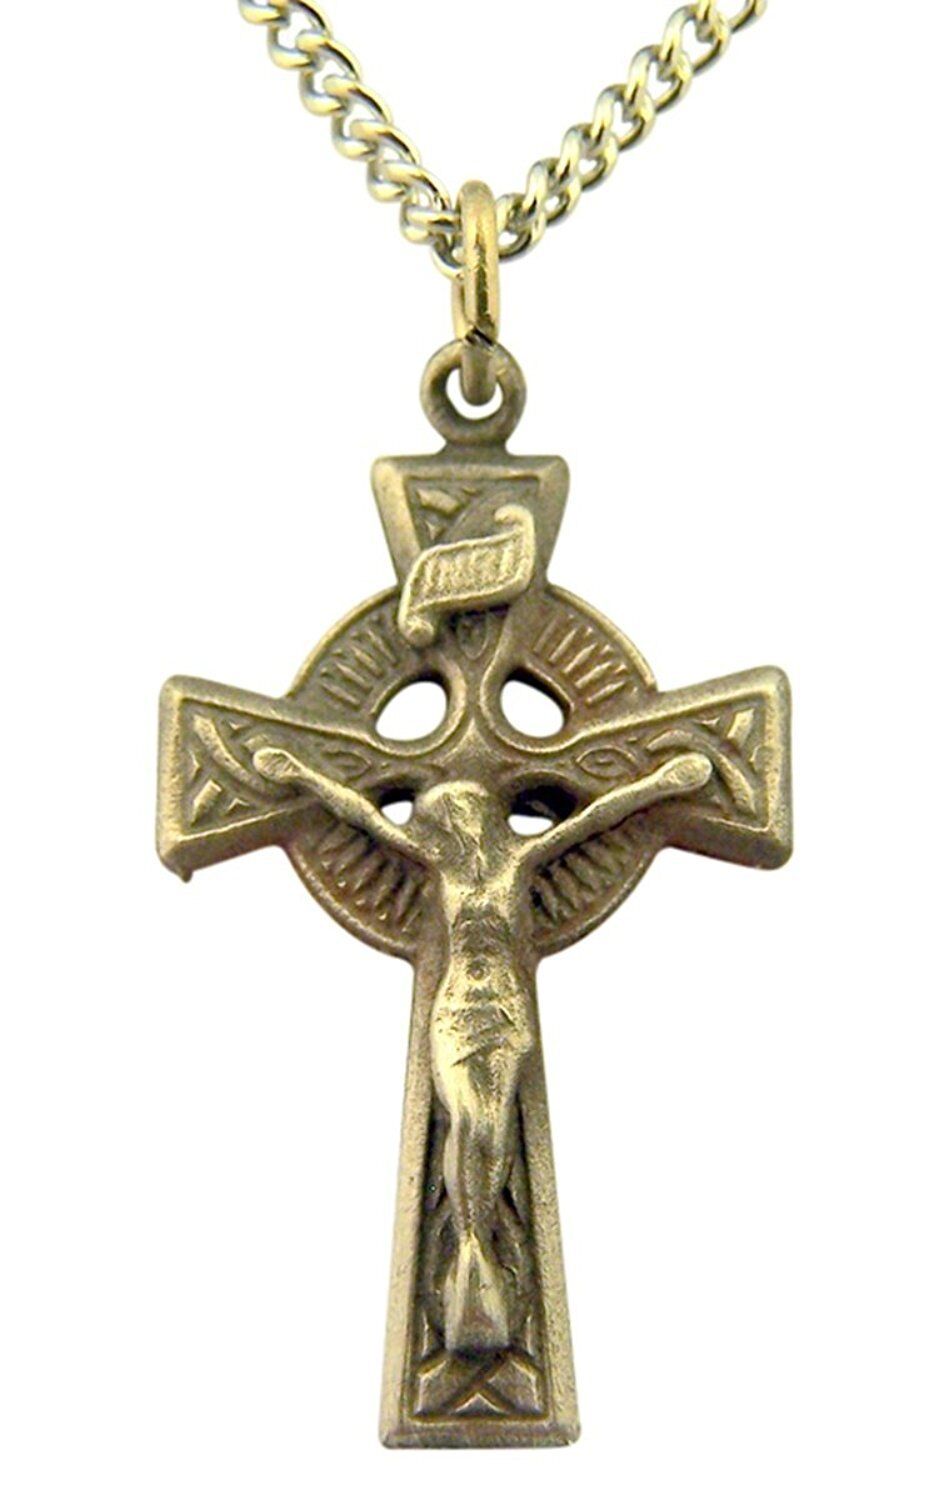 Pewter Celtic High Cross Crucifix with Irish Knotwork Design, 1 1/8 Inch